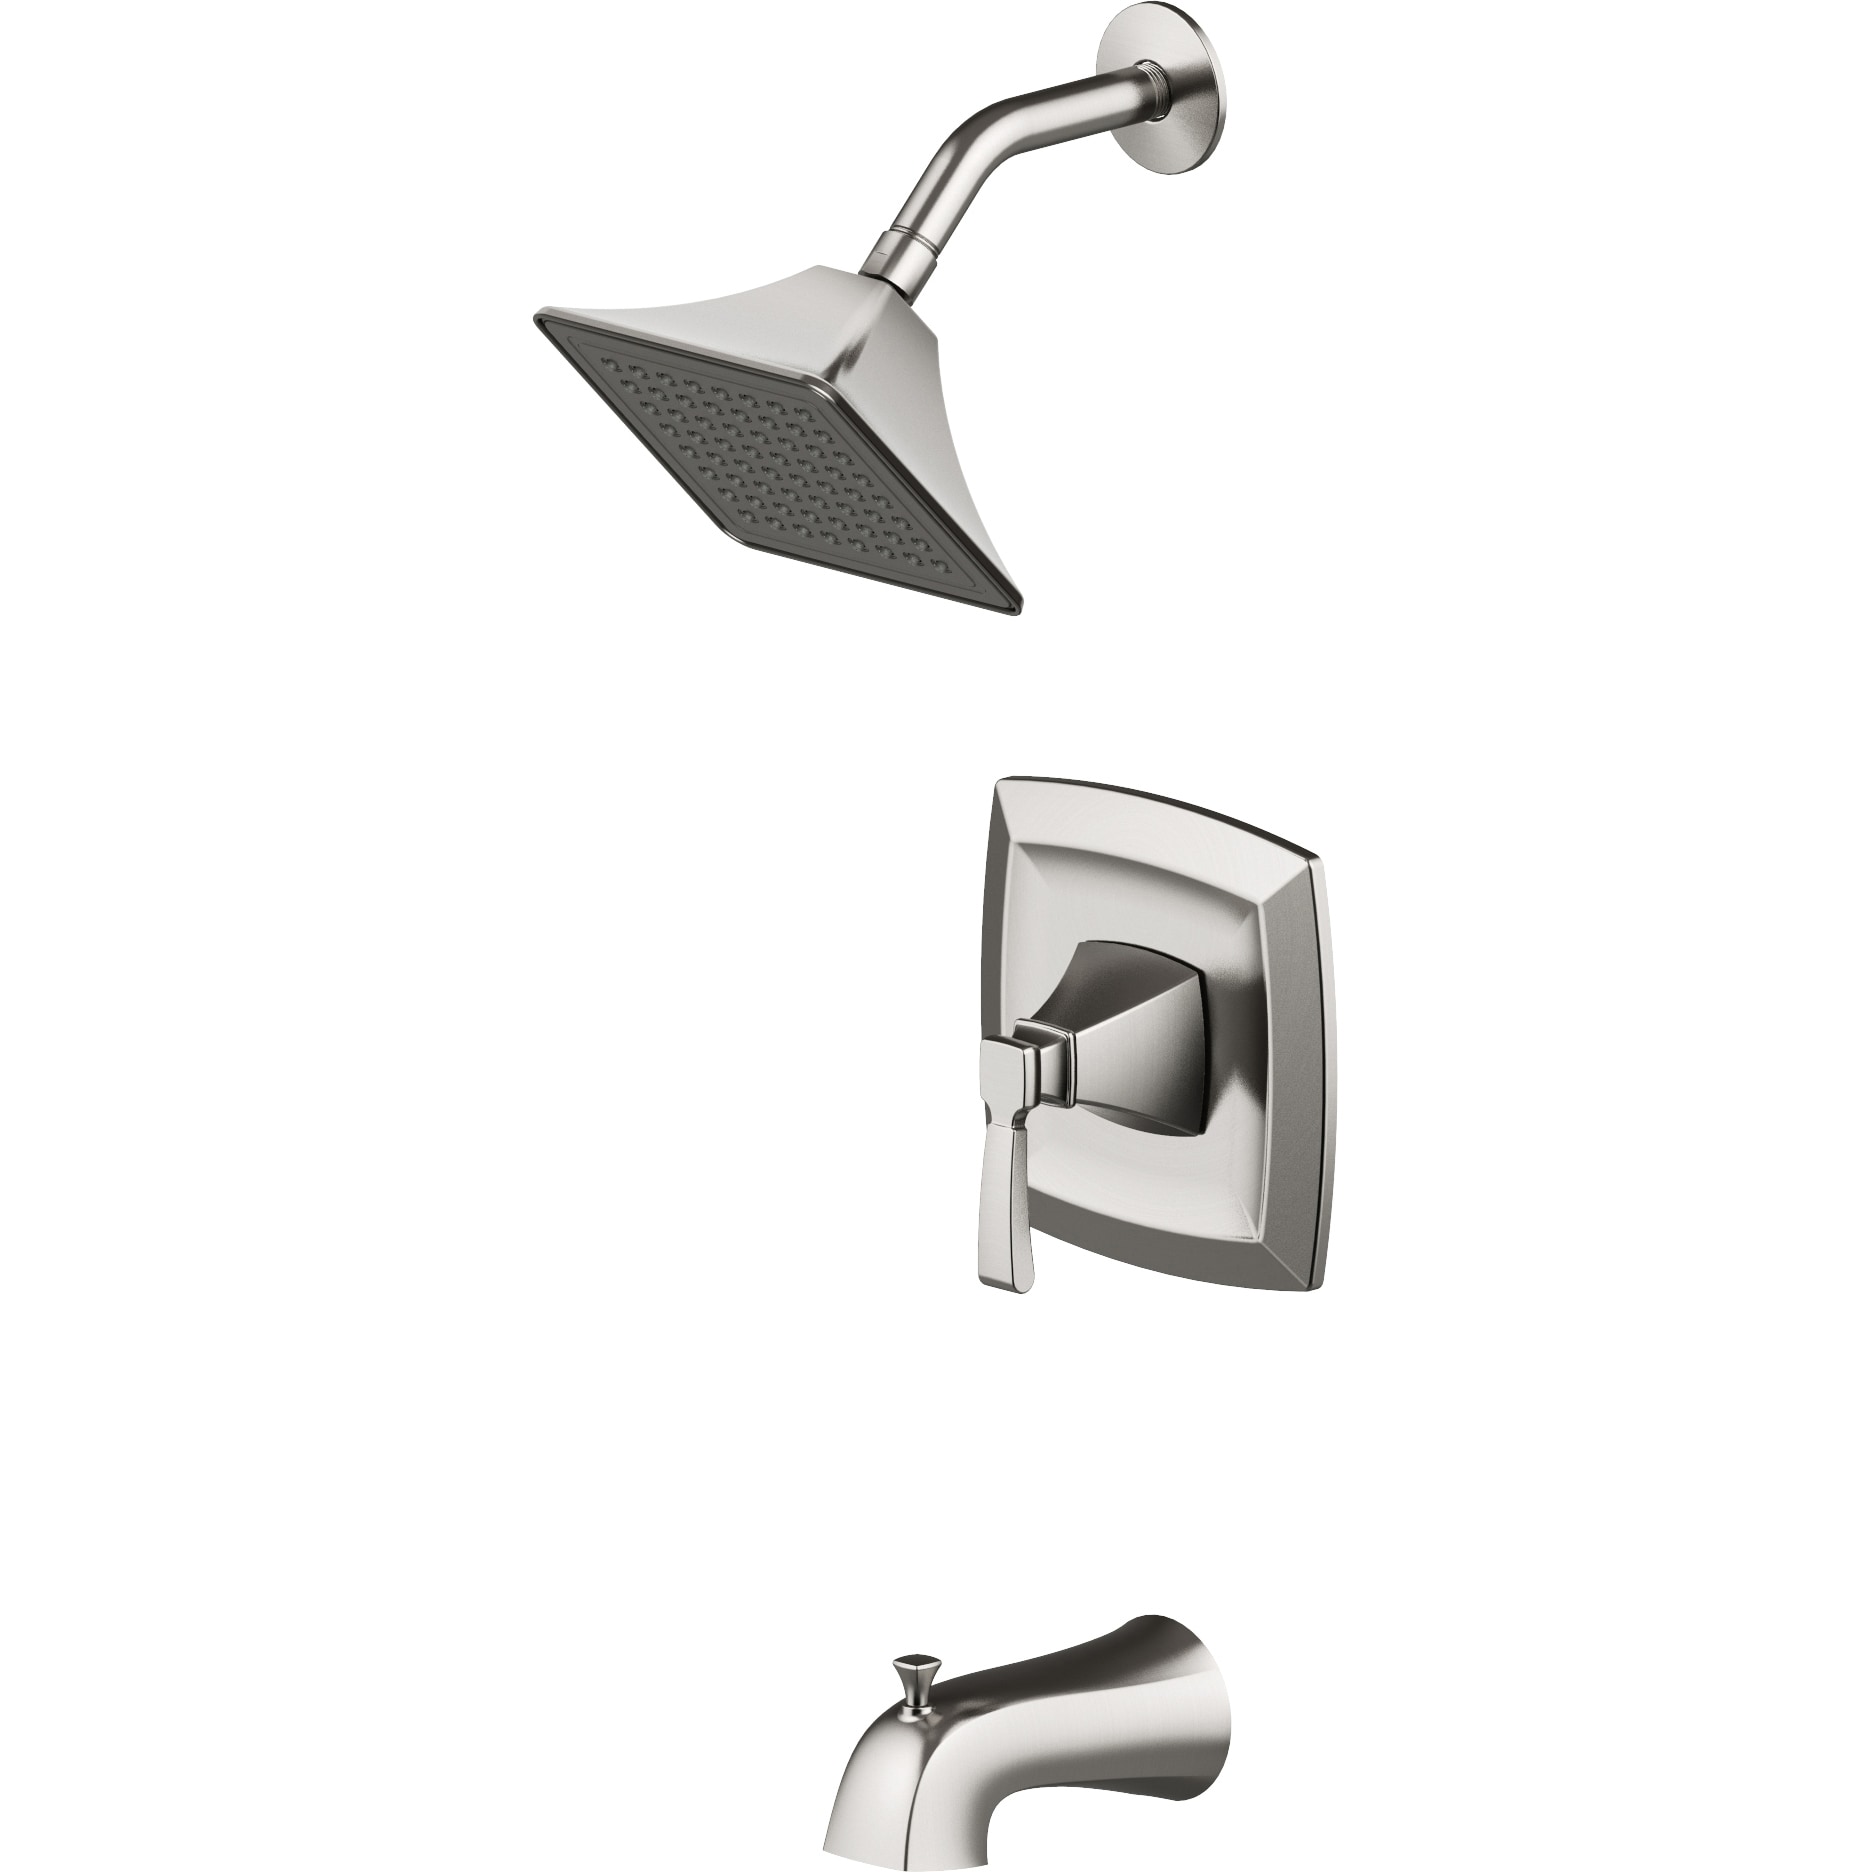 allen + roth Chesler Brushed Nickel 1-handle Single Function Square Bathtub and Shower Faucet Valve Included